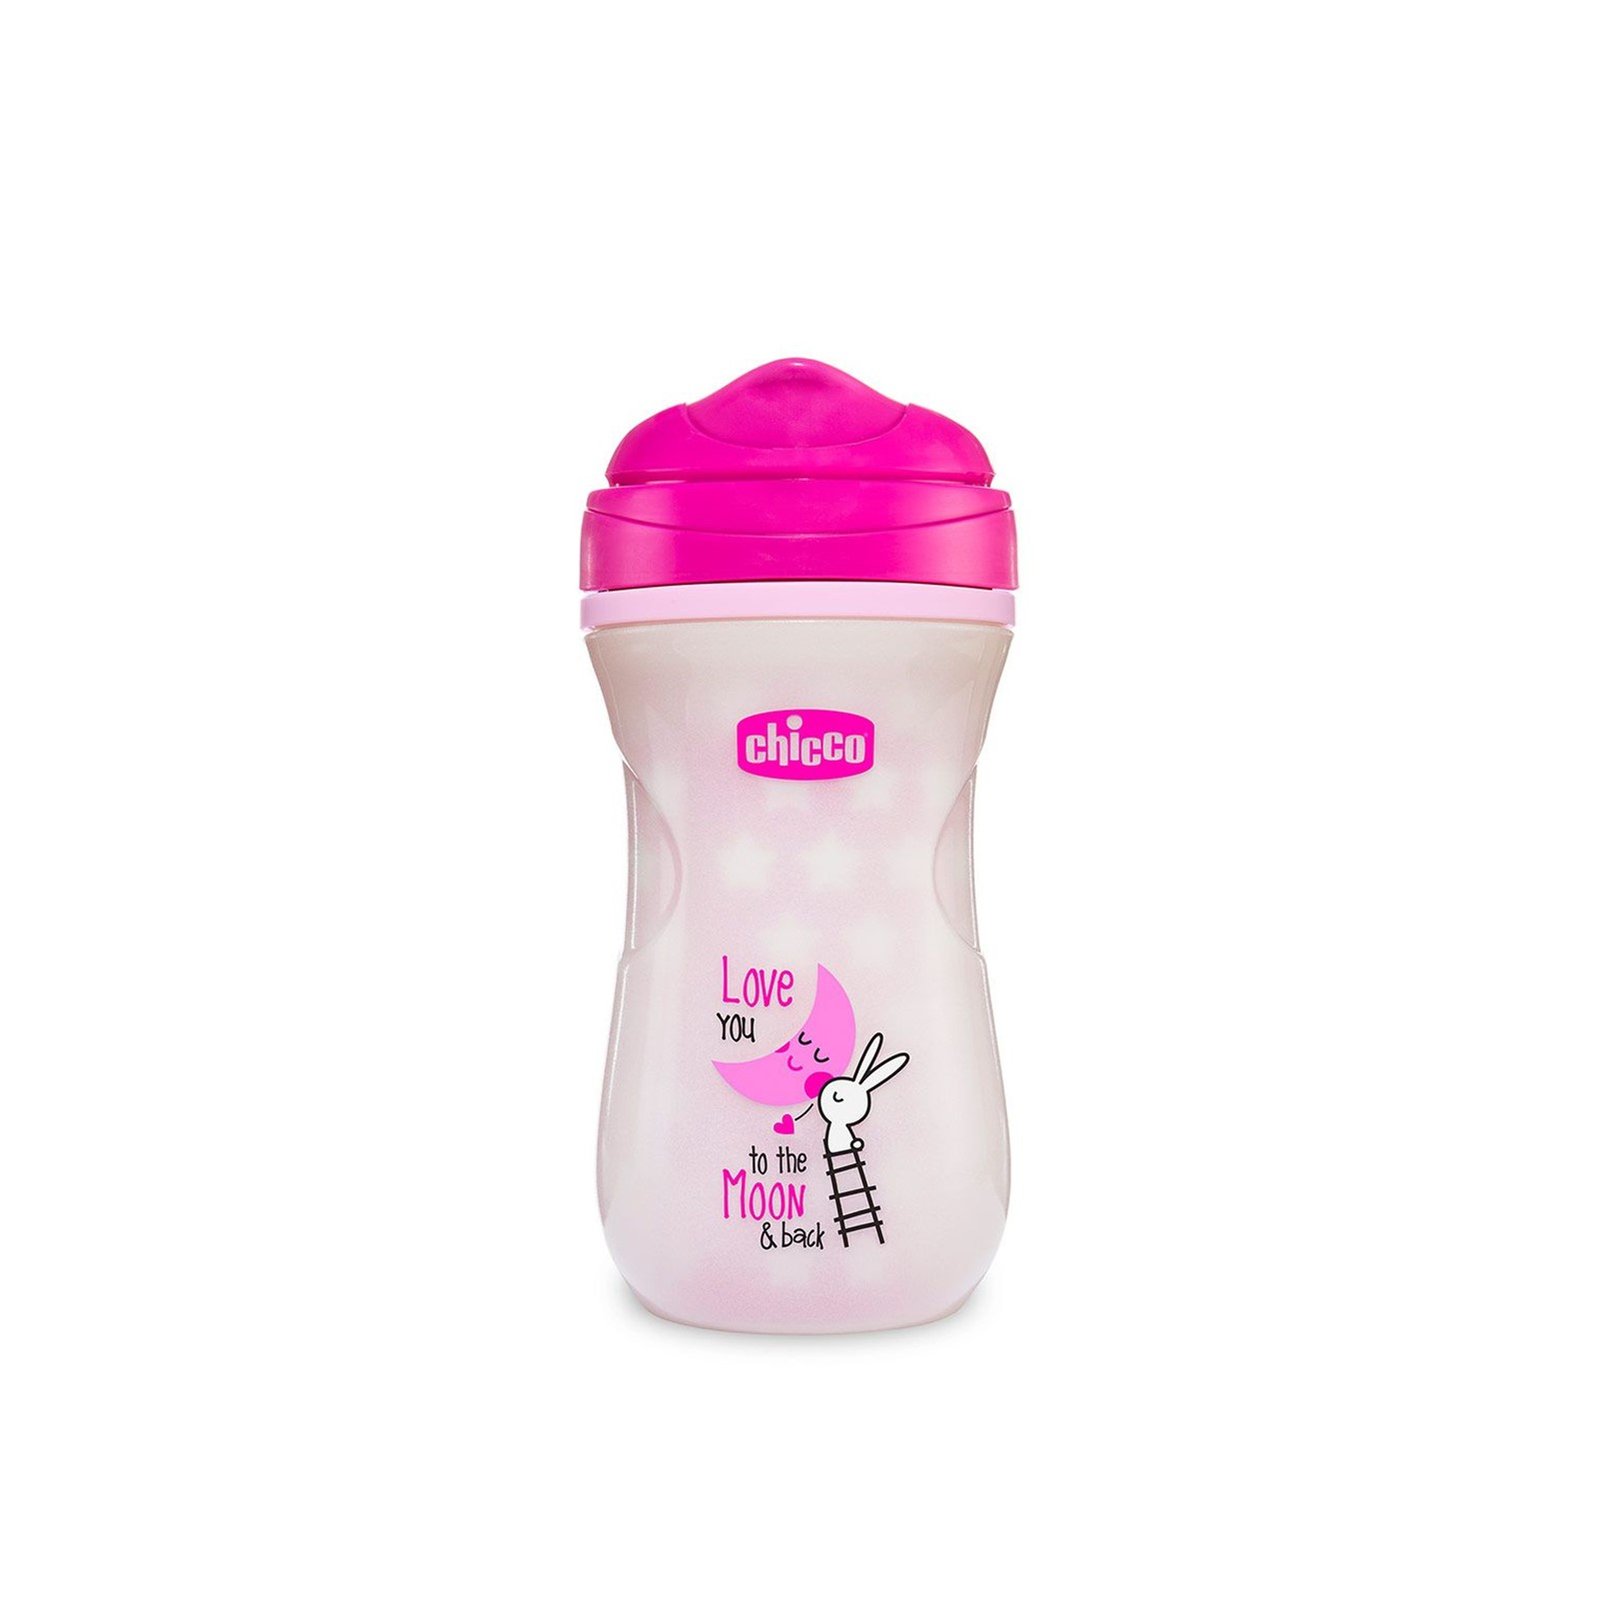 No-Spill Glow Cup - Lighten up your next sippy cup with Pink Glow! 